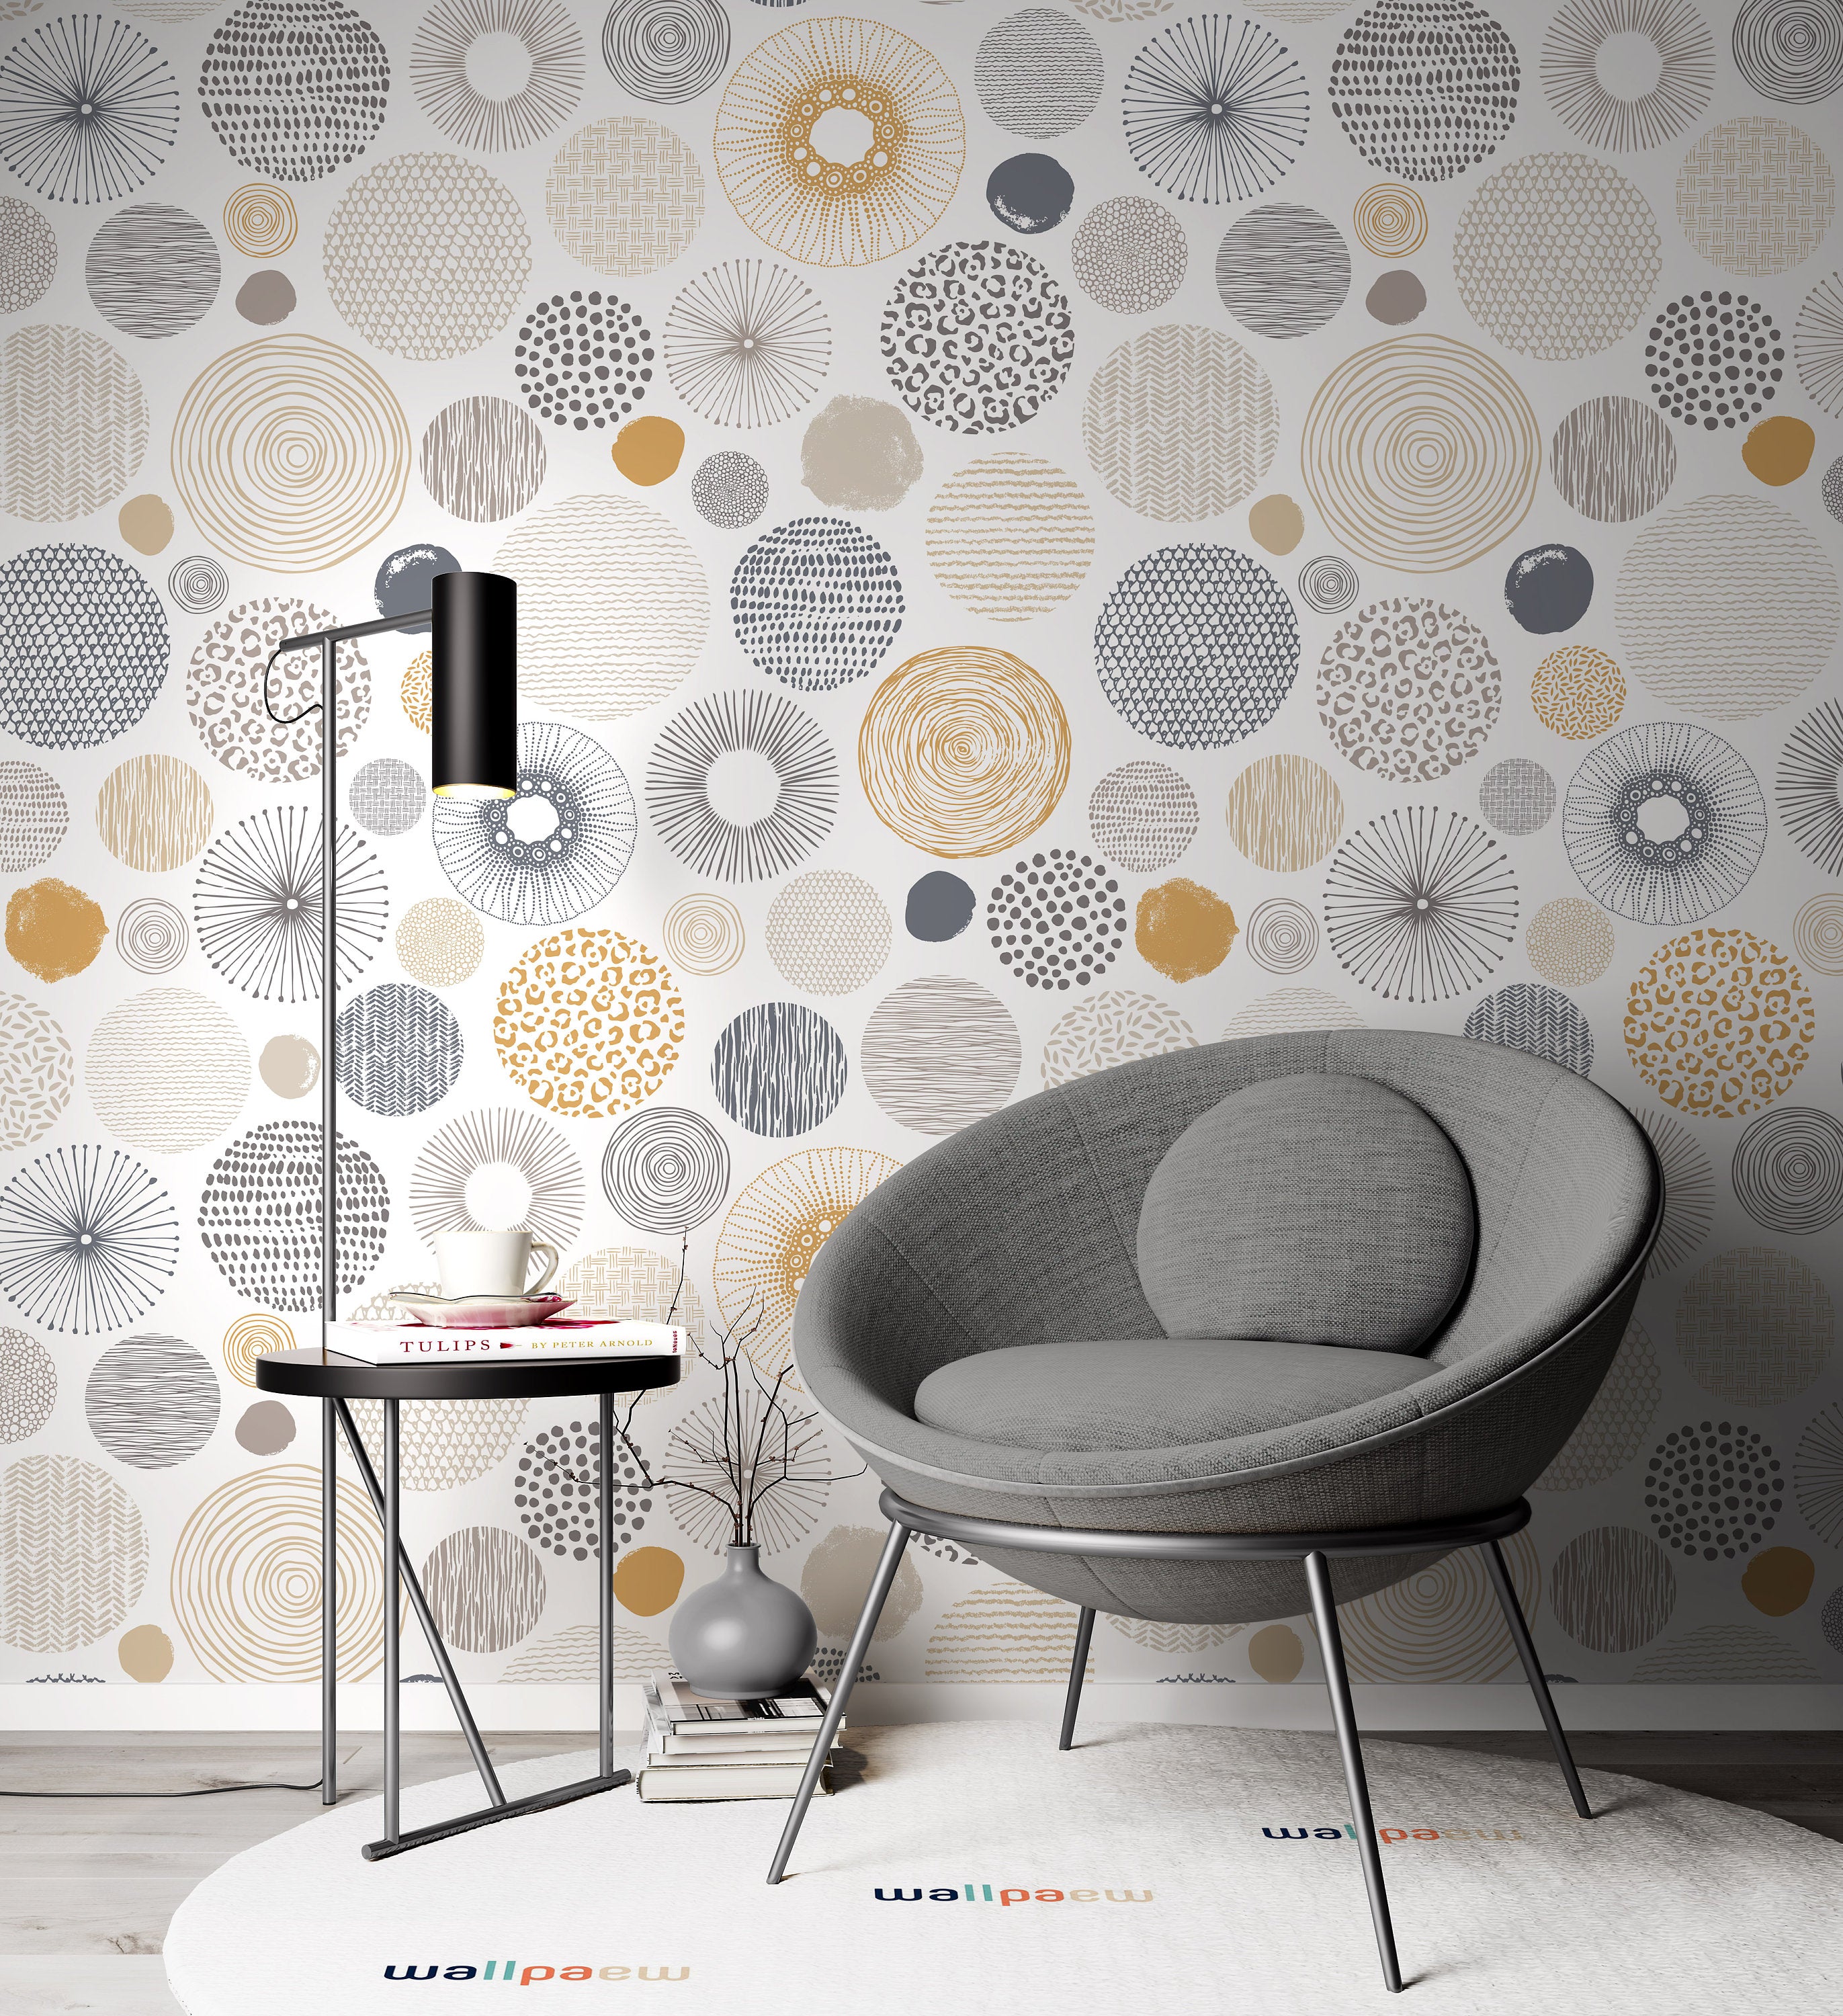 Doodle Circles Randomly Distributed Abstract Pastel Colors Wallpaper Cafe Restaurant Decoration Living Room Bedroom Mural Home Decor Wall